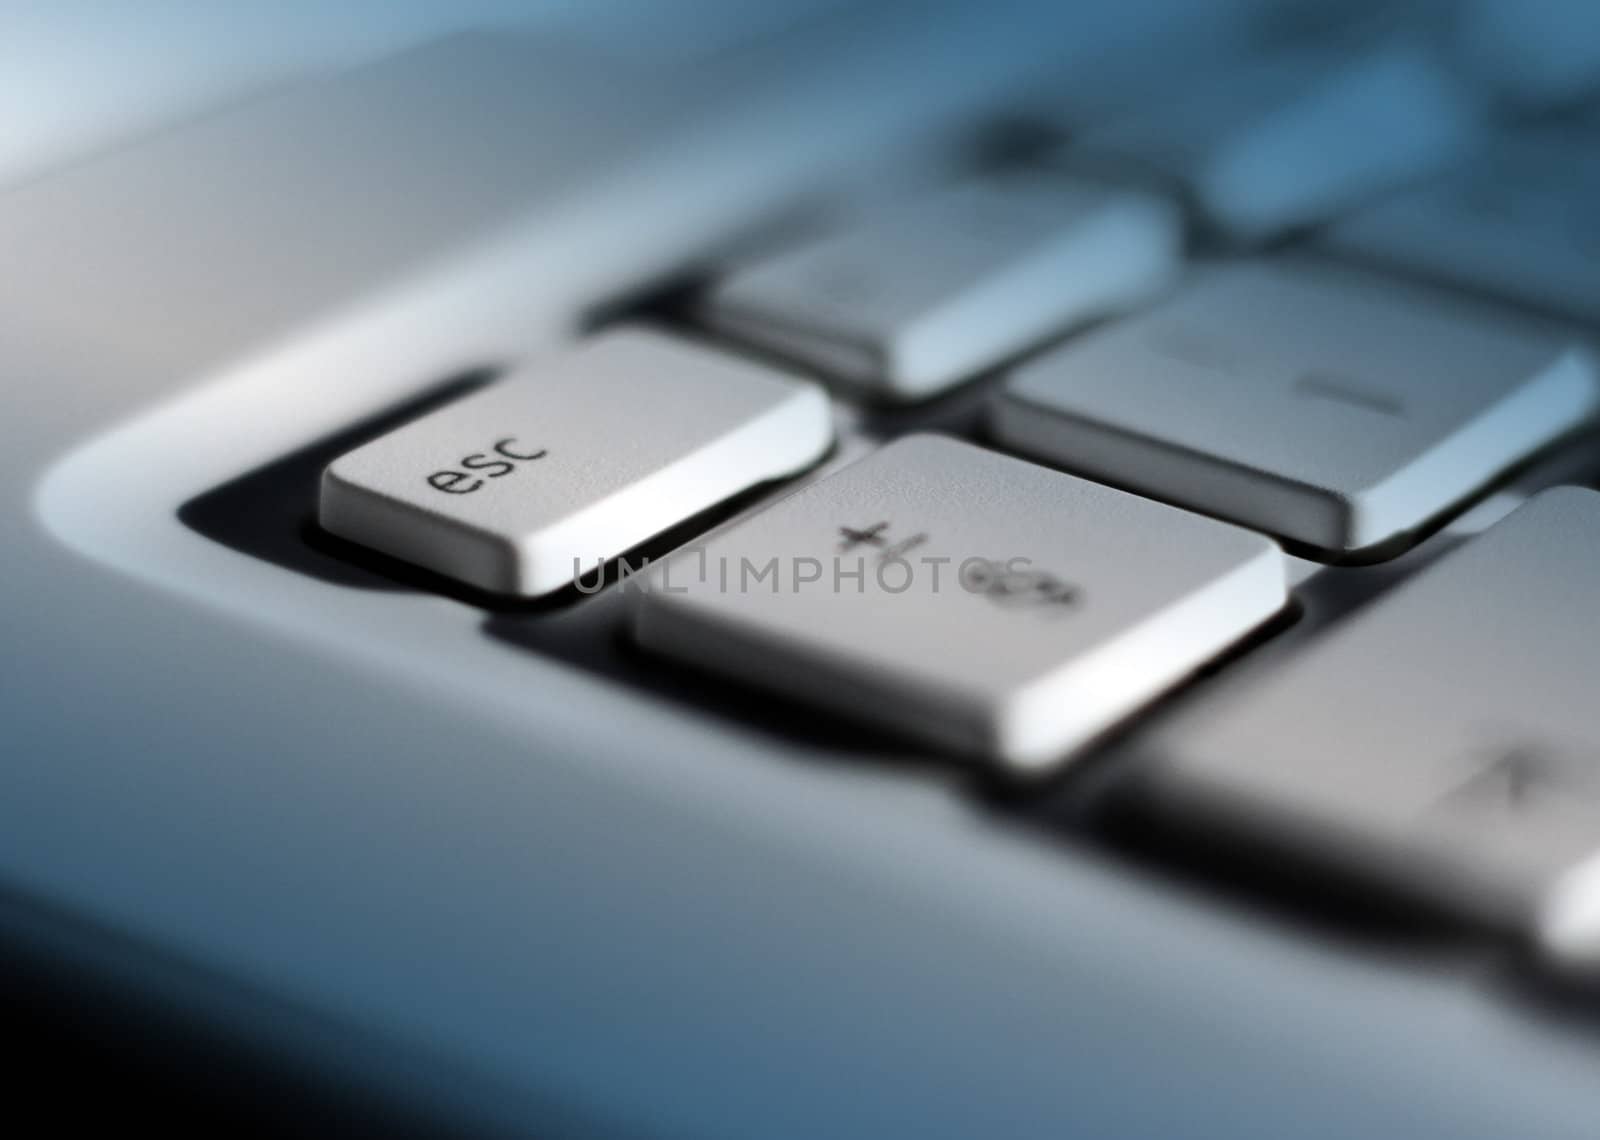 Close-up of laptop keyboard with focus on escape key. Blue lighting effect added with clear patch on escape key.